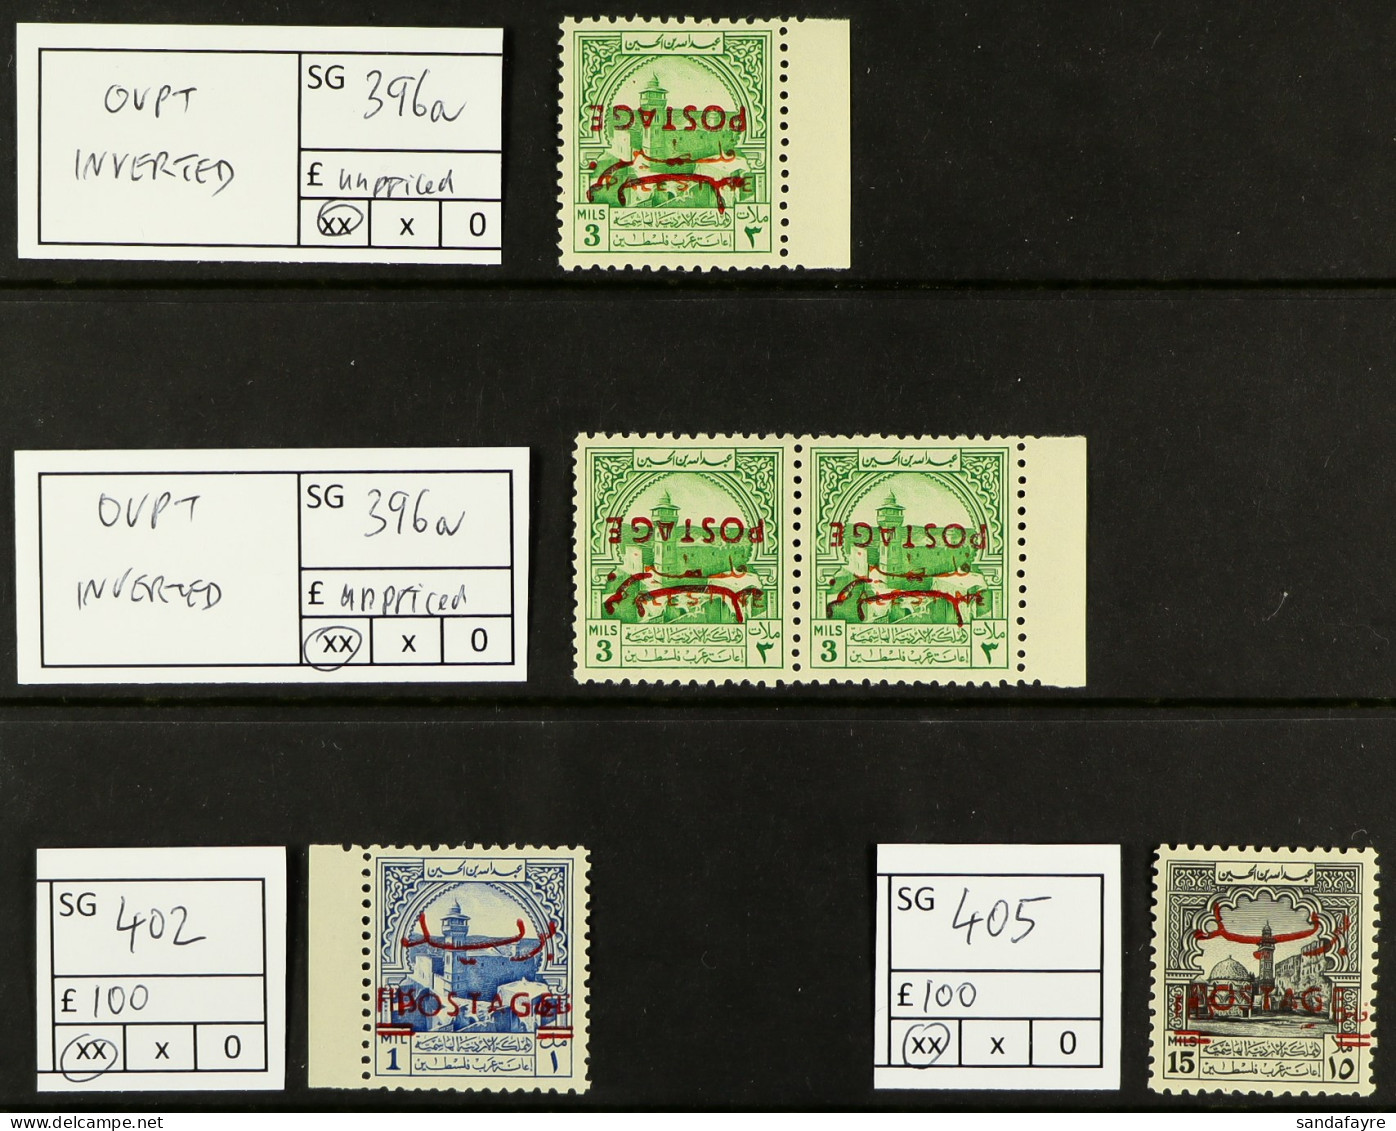 1953-56 'POSTAGE' OVERPRINTS NEVER HINGED MINT GROUP, Includes On 'Palestine' 3m Opts Inverted (x3 Incl Pair, Unpriced), - Jordan